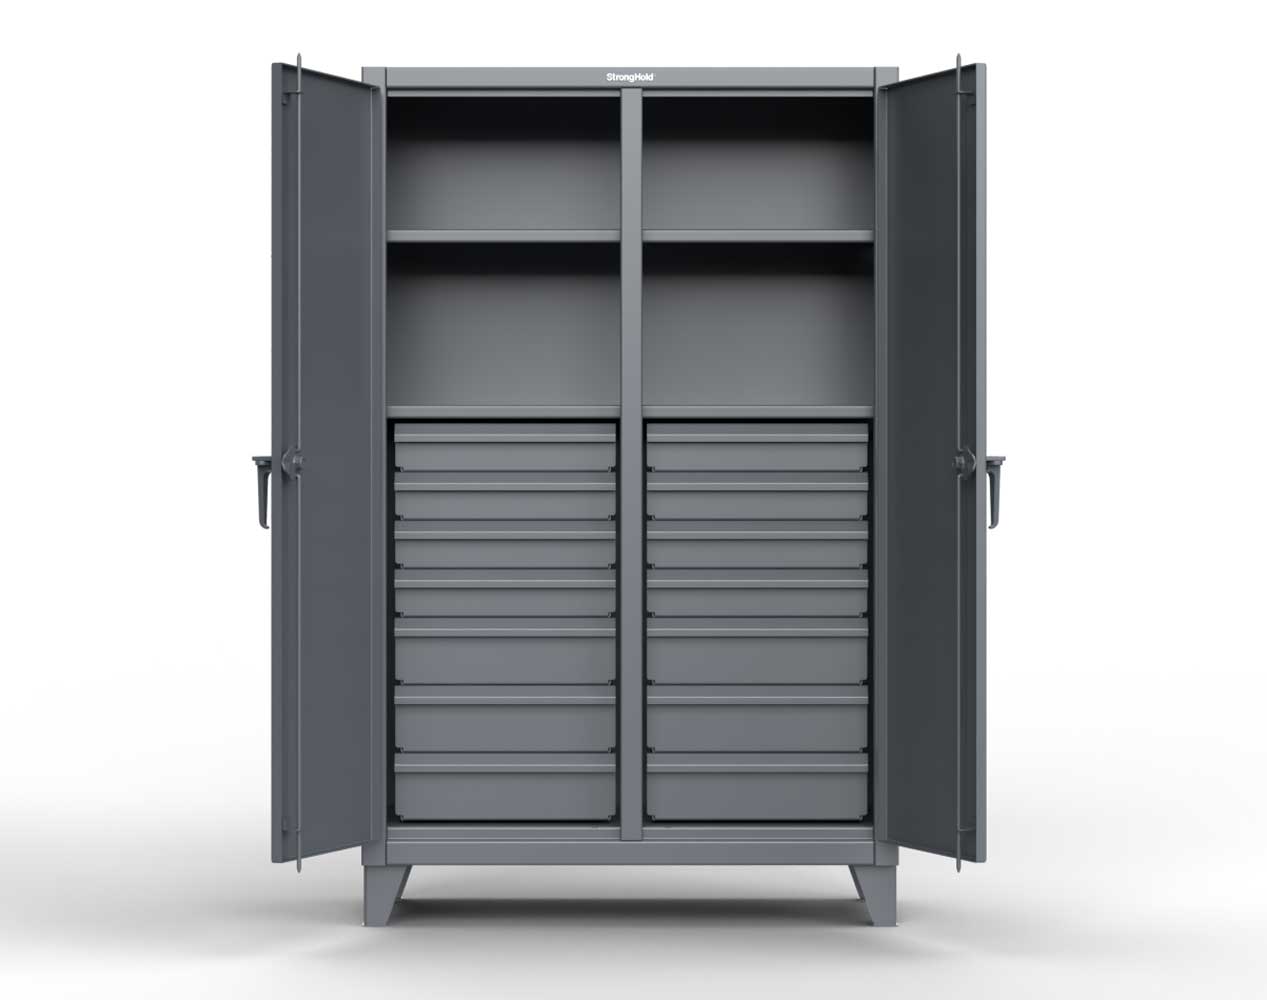 Extreme Duty 12 GA Double Shift Cabinet with 14 Drawers, 4 Shelves - 72 In. W x 24 In. D x 78 In. H